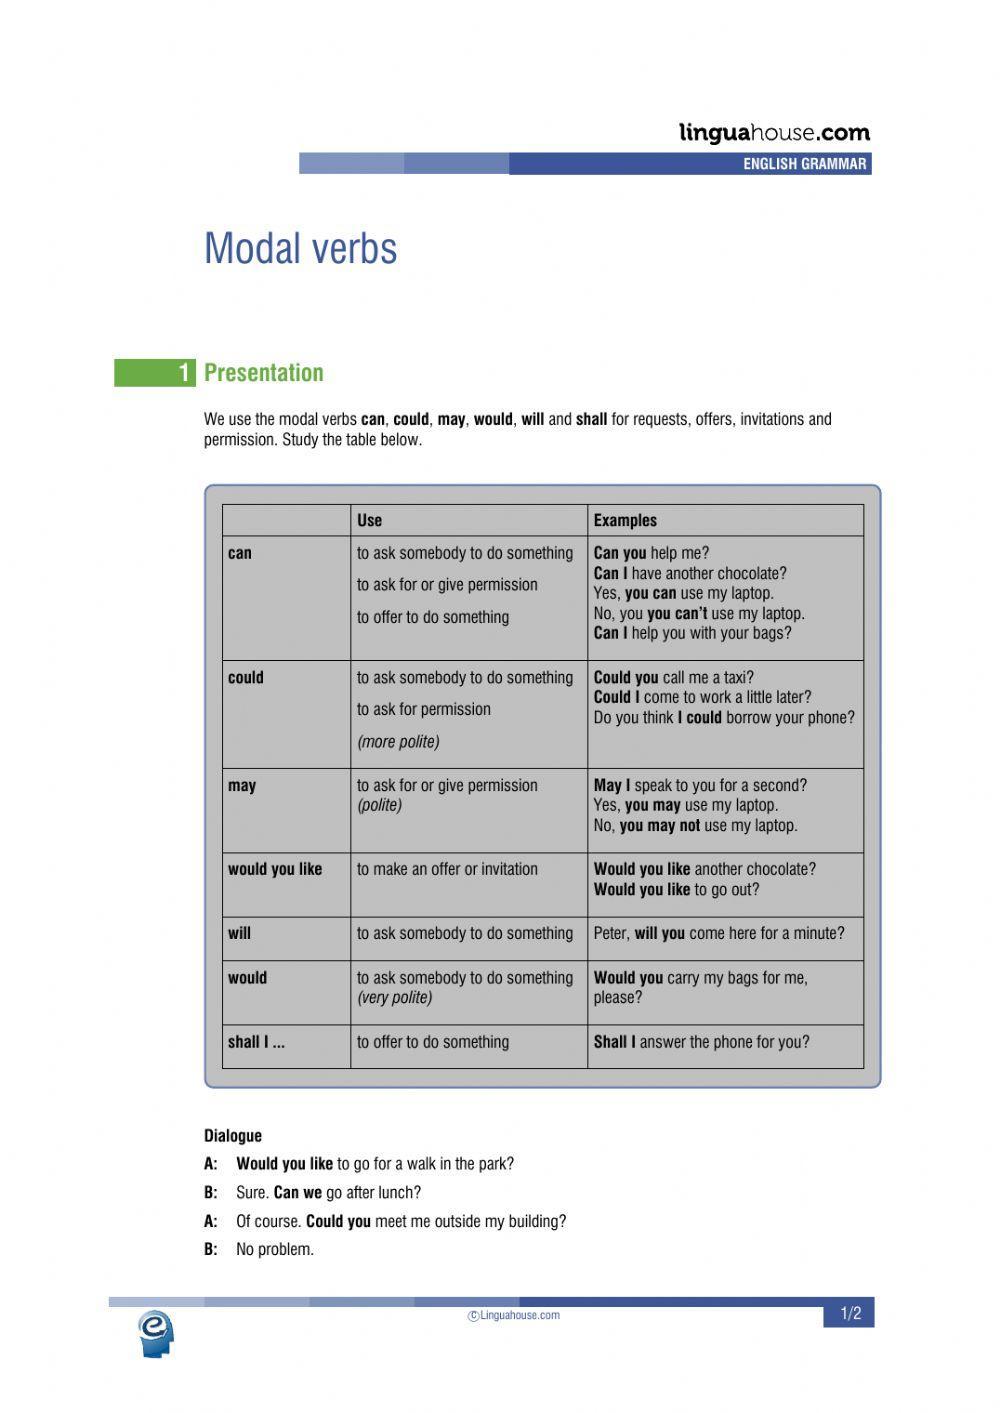 Modal Verbs - Permission, Requests, Offers and Invitations